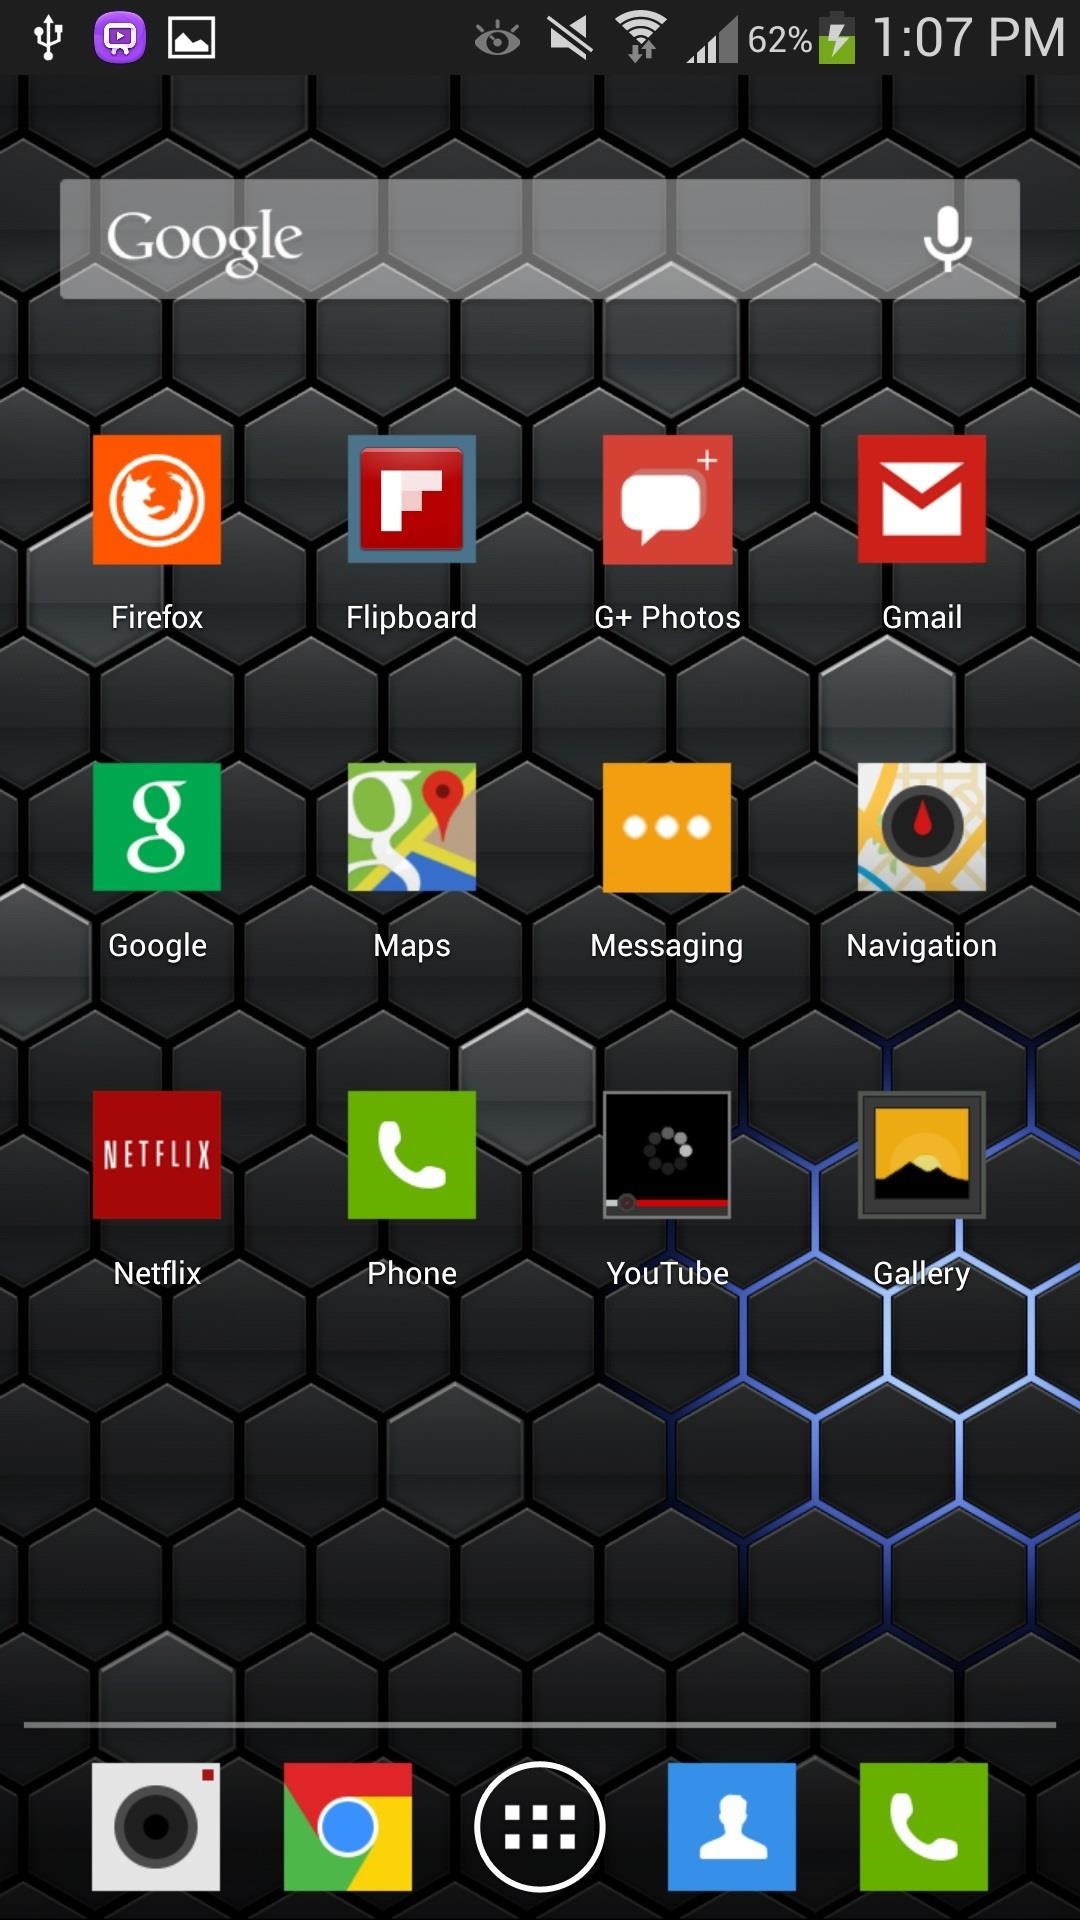 How to Get "Metro-Inspired" App Icons on Your Samsung Galaxy S4 for a Sleek-Looking Home Screen